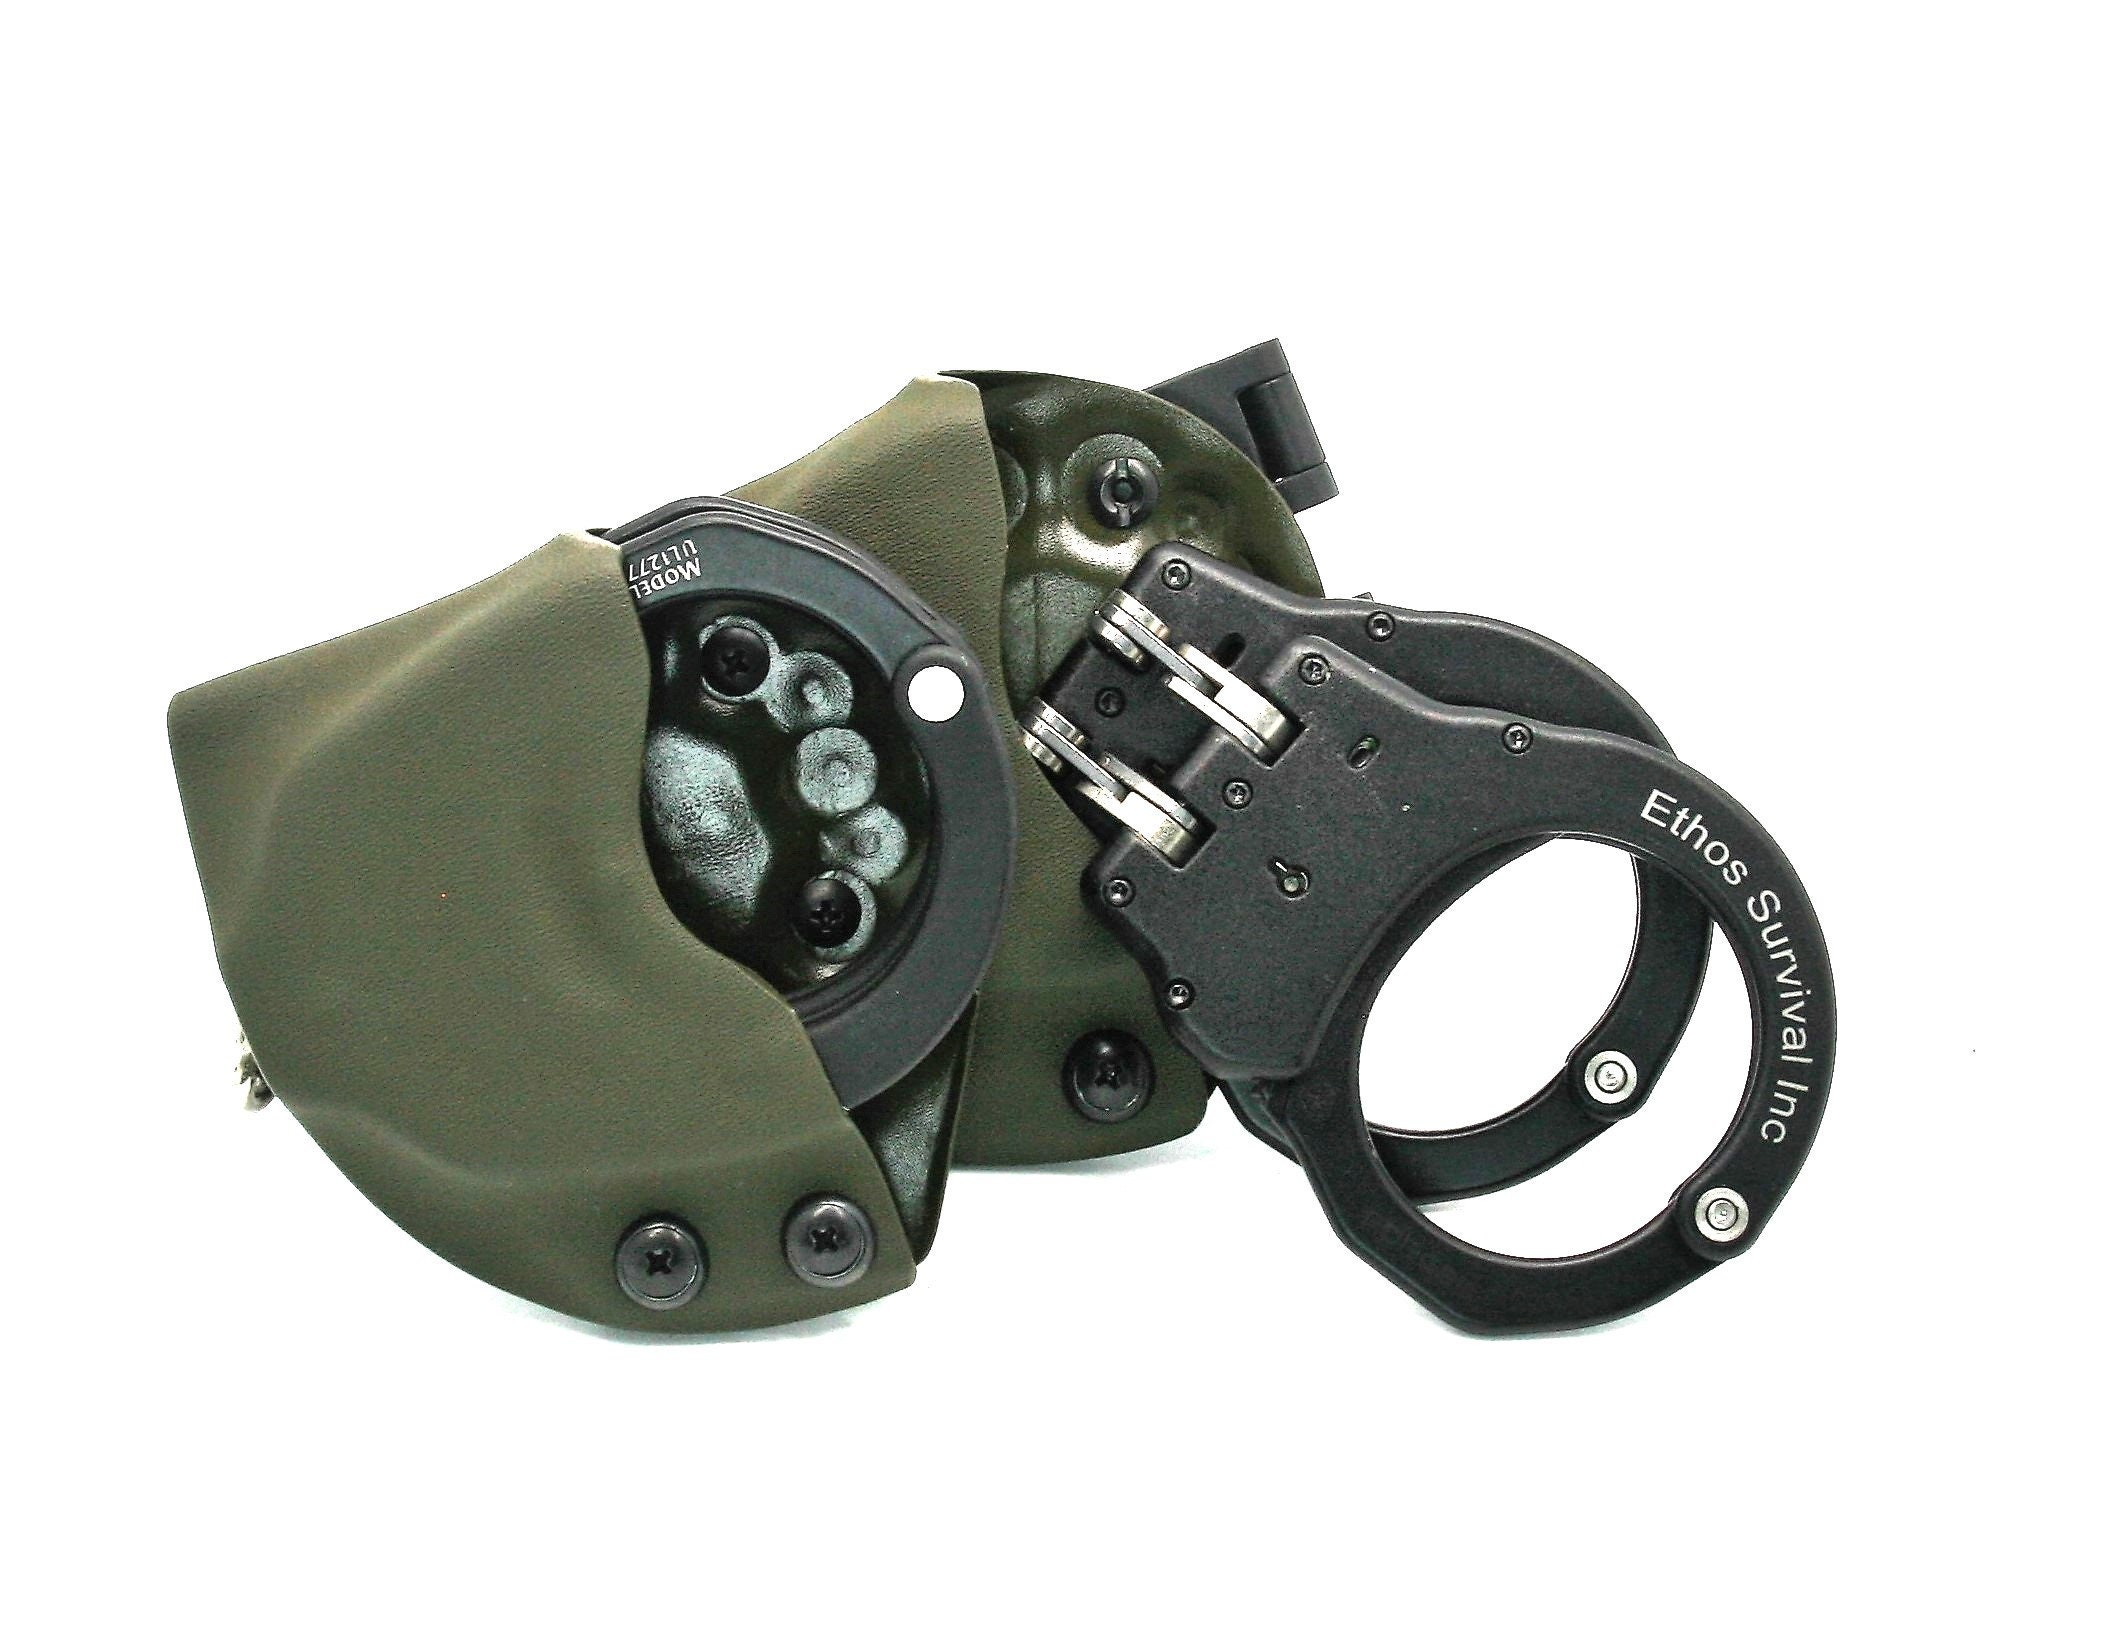  Kydex Handcuff Pouch for Duty Belt, Handcuff Case Fit Most  Standard Size Asp Handcuff/S&W hinged Handcuff/Chain Handcuffs, Law  Enforcement Cuff Holder, Fit 1.5&1.75&2.0&2.25'' Belt Width : Sports &  Outdoors